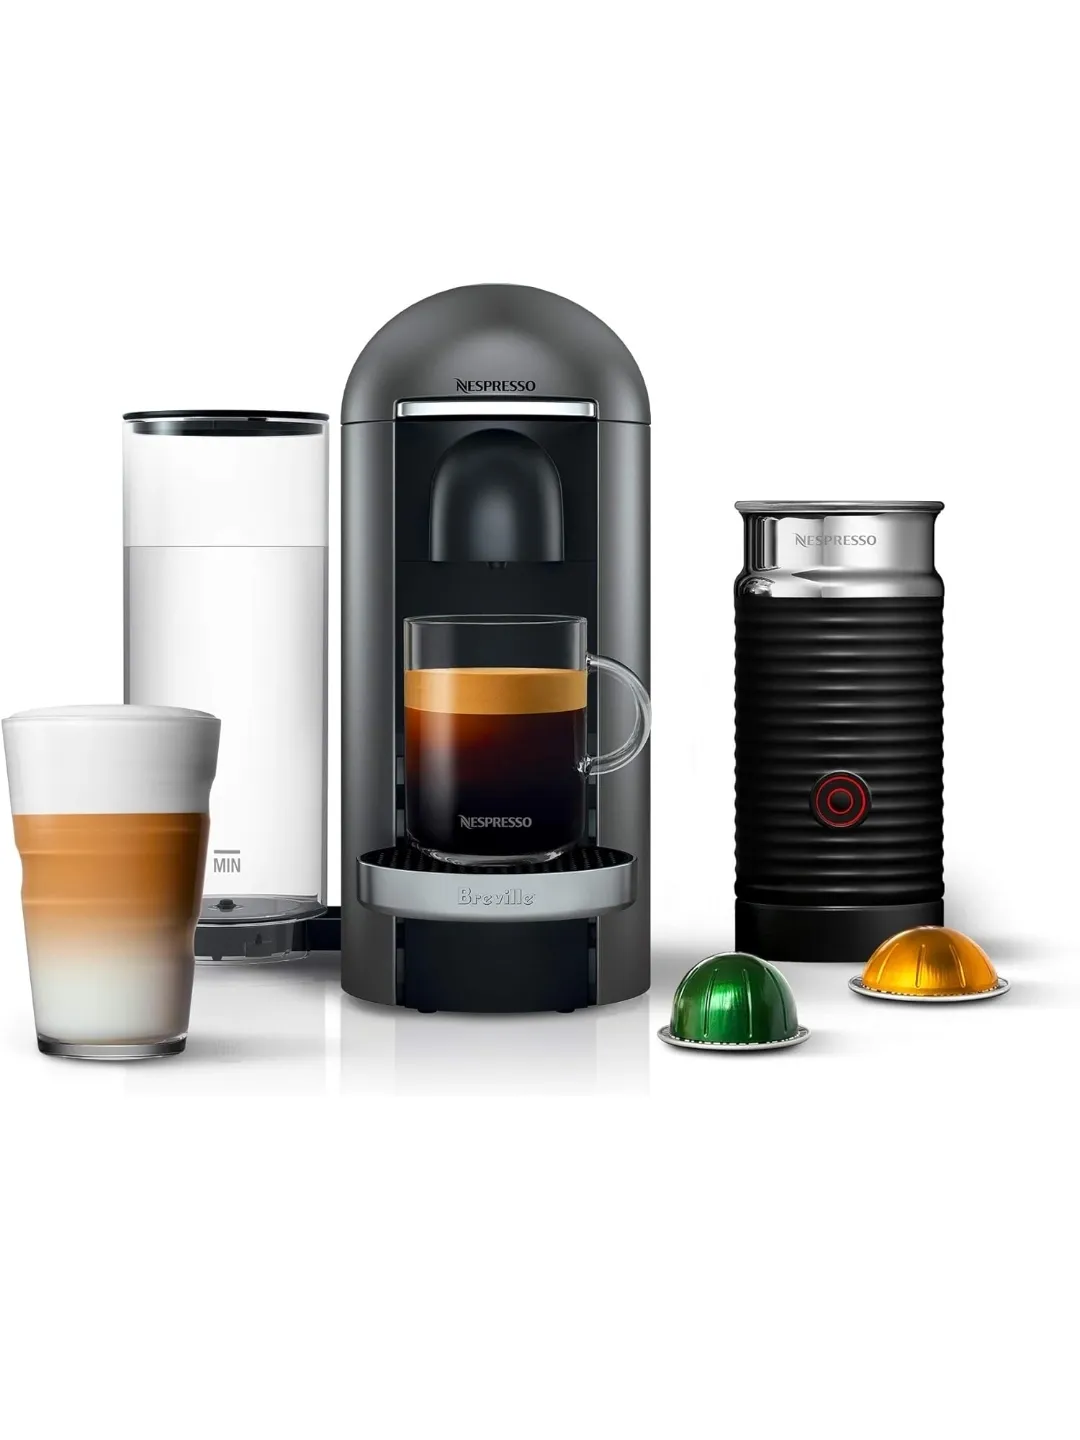 Nomad tumblers from @nespresso are back in stocked